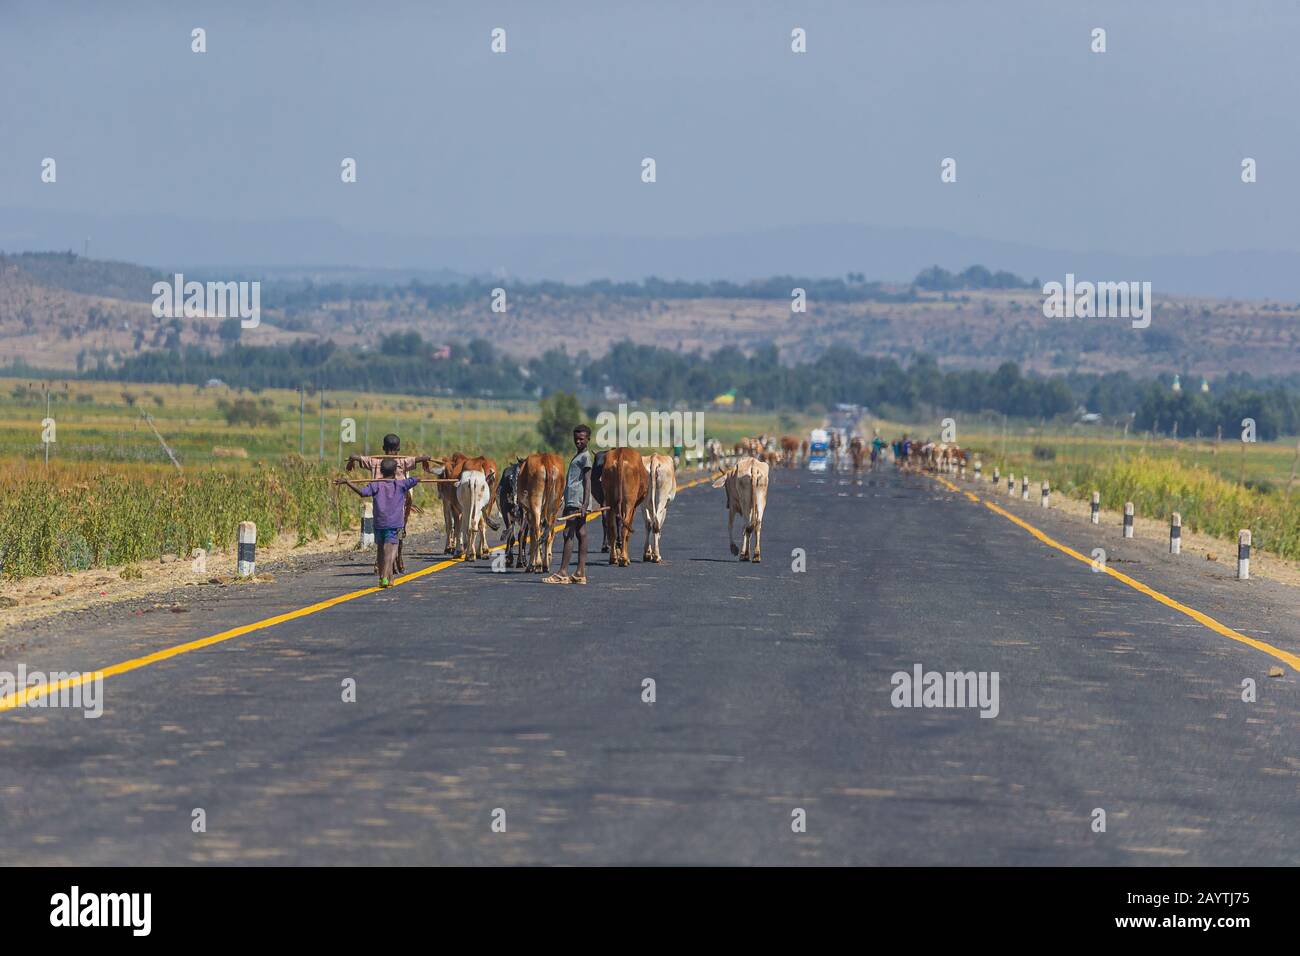 Ethiopia ca. January 2019: Local kids walk northwards with their lifestock on the way to a market in the Amhara region of Ethiopia Stock Photo